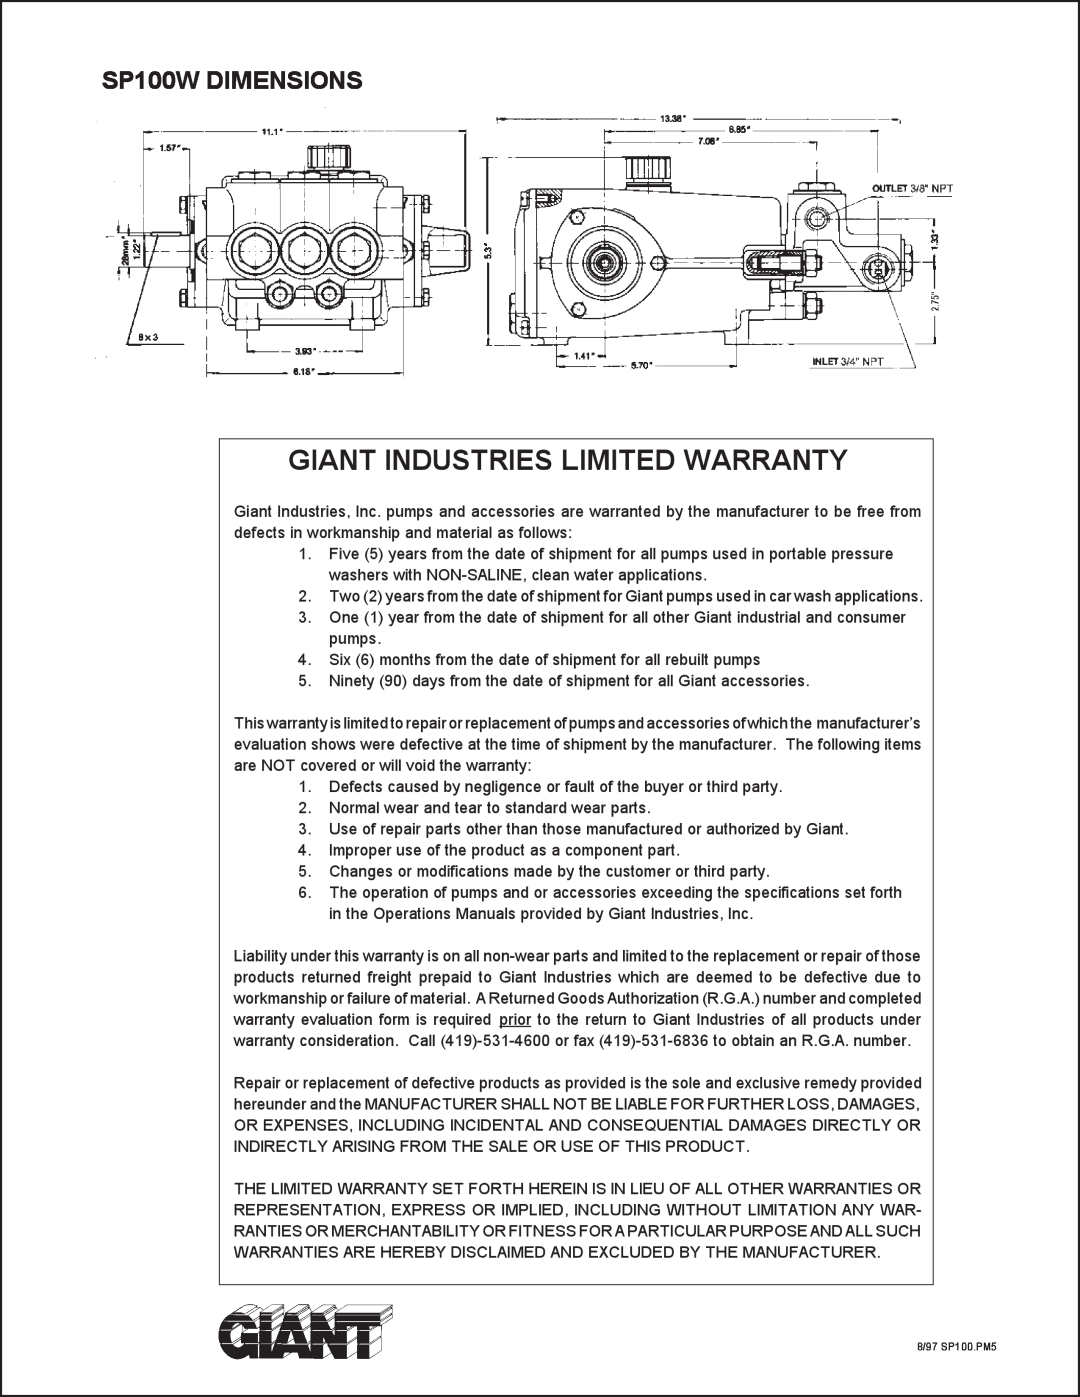 Giant service manual Giant Industries Limited Warranty, SP100W DIMENSIONS 